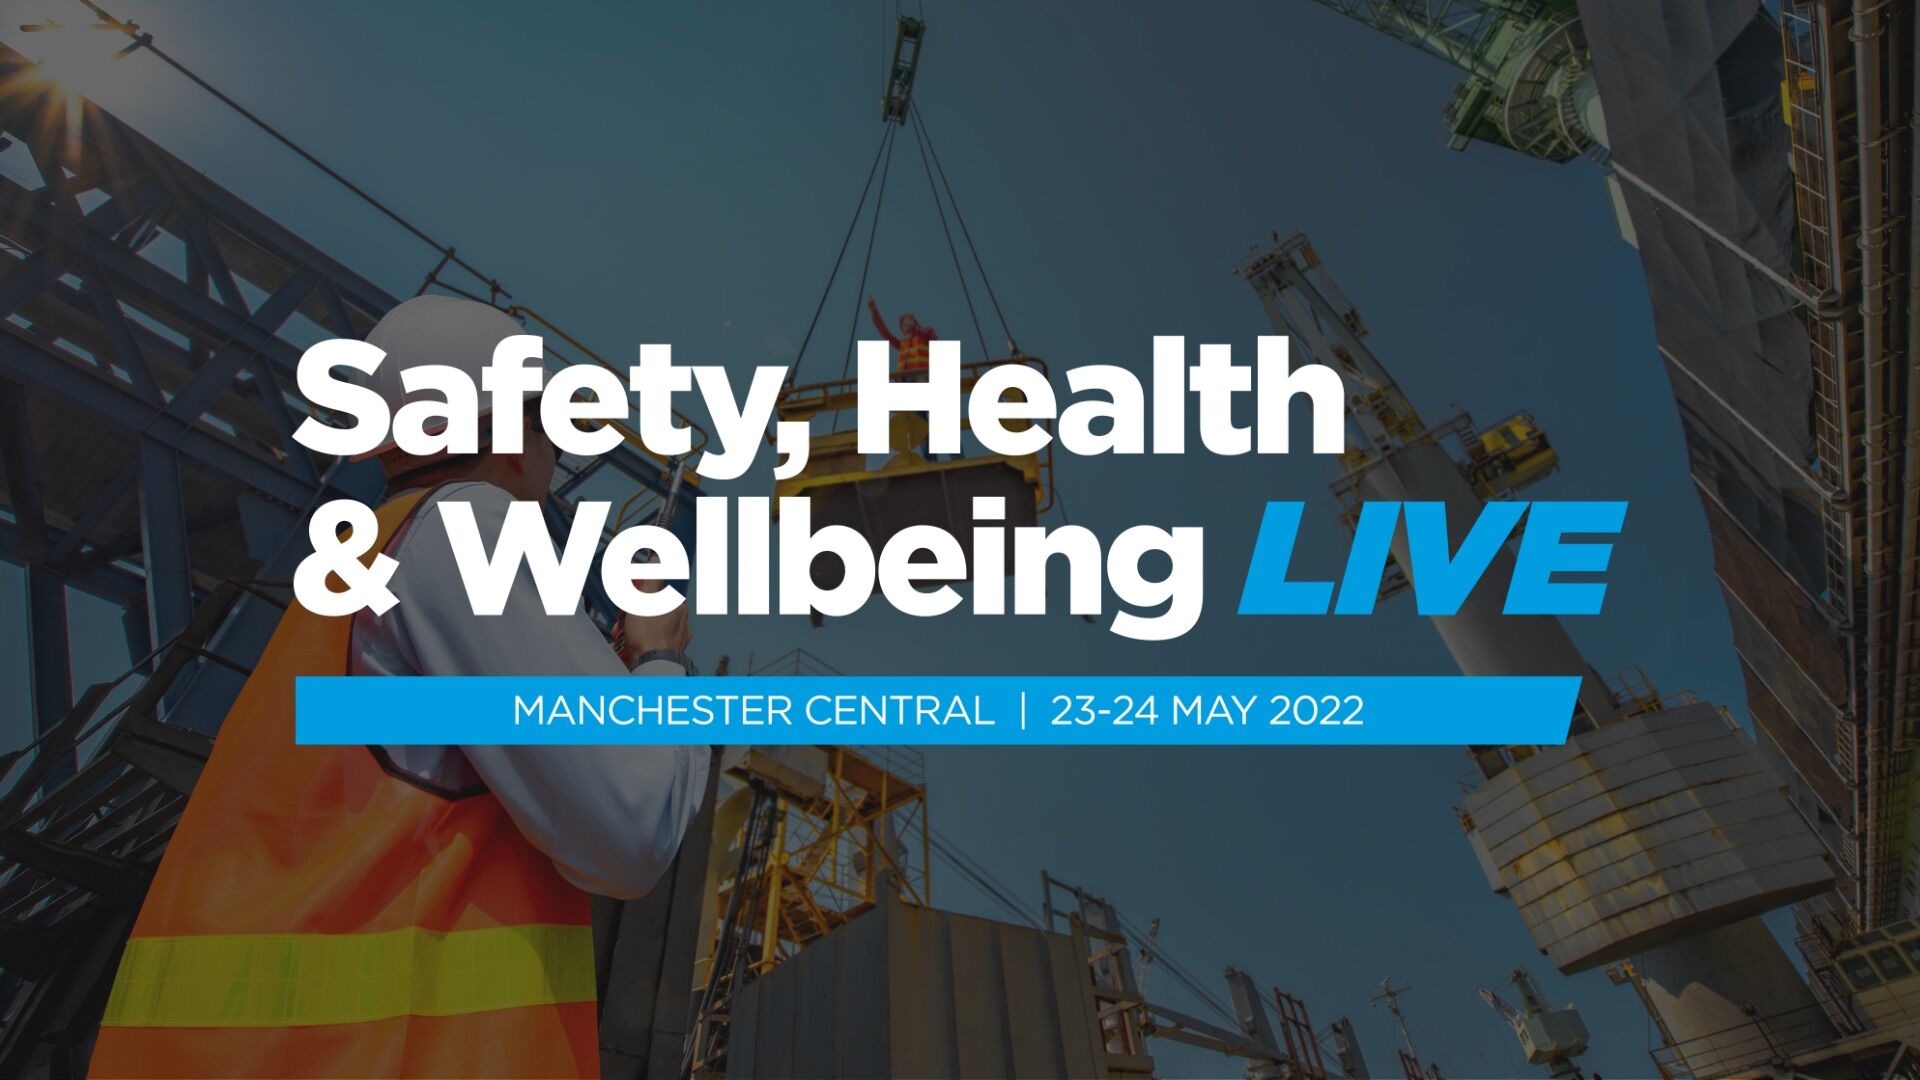 SHW Live Manchester rescheduled for May 2022